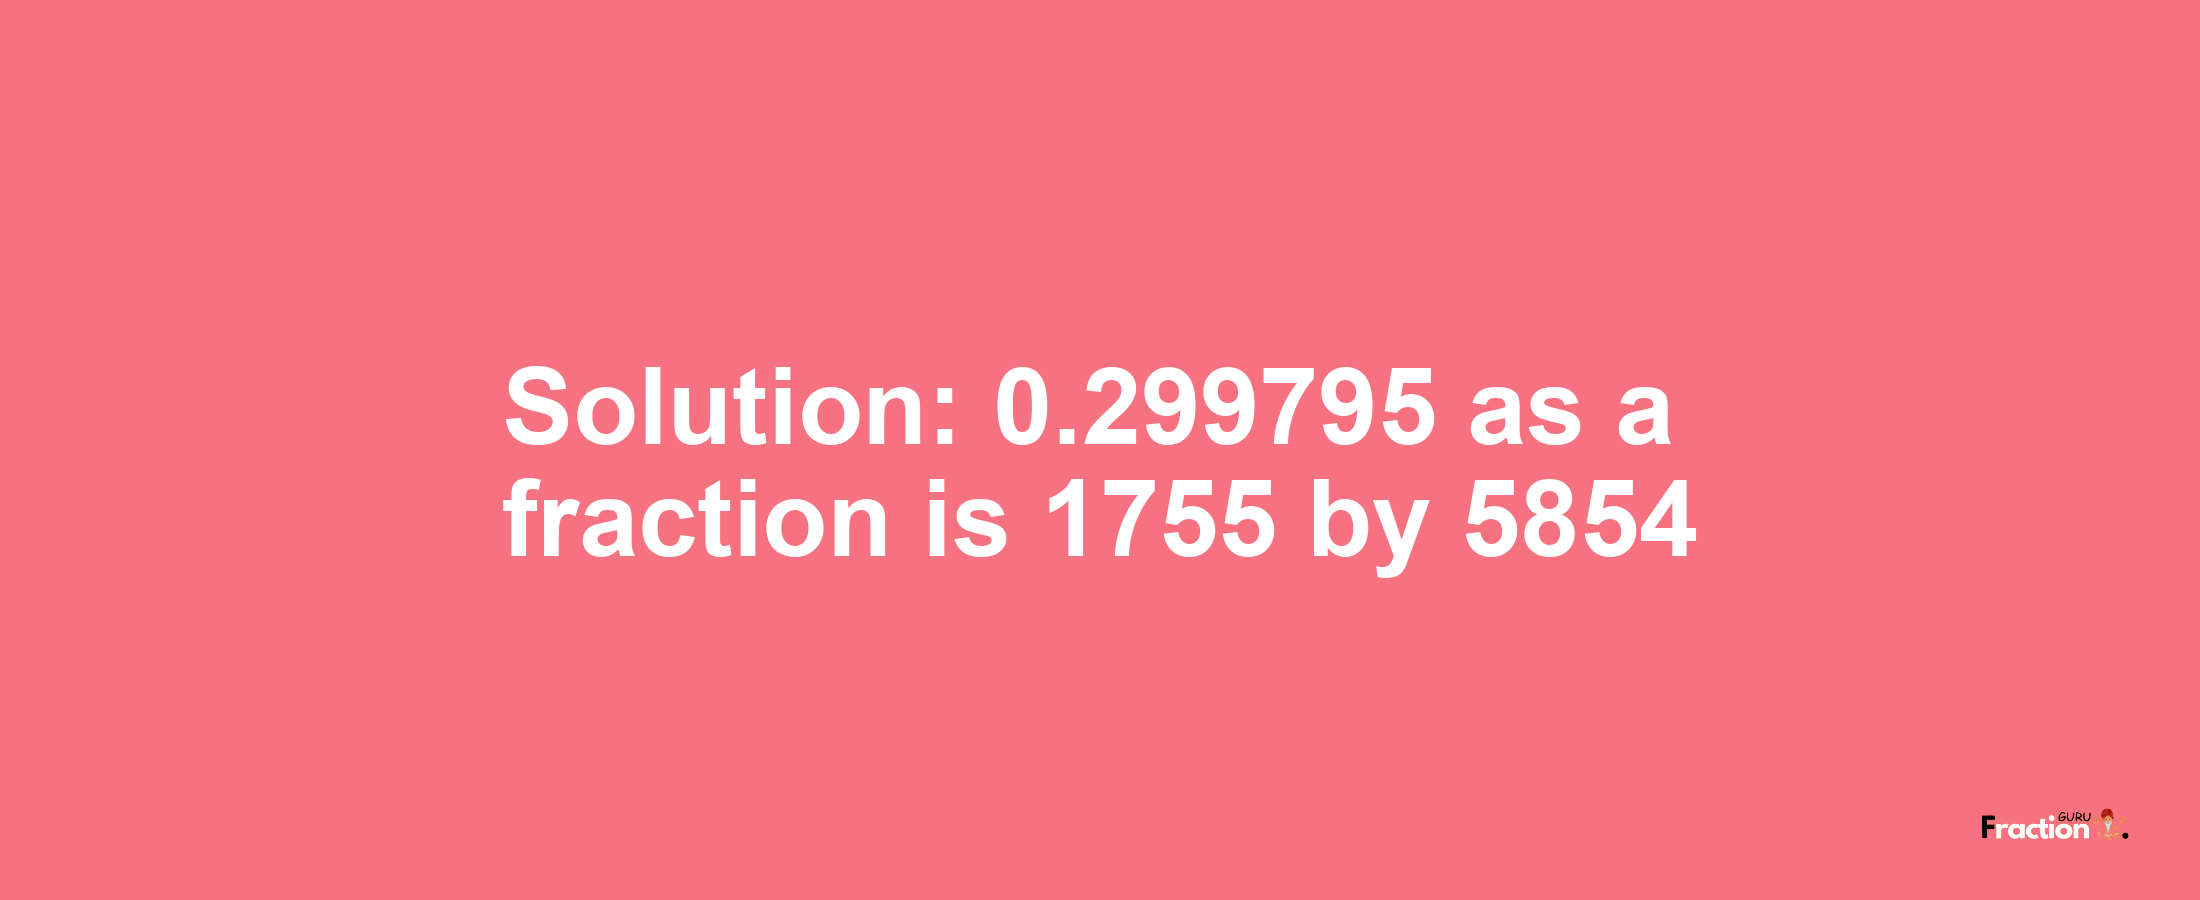 Solution:0.299795 as a fraction is 1755/5854